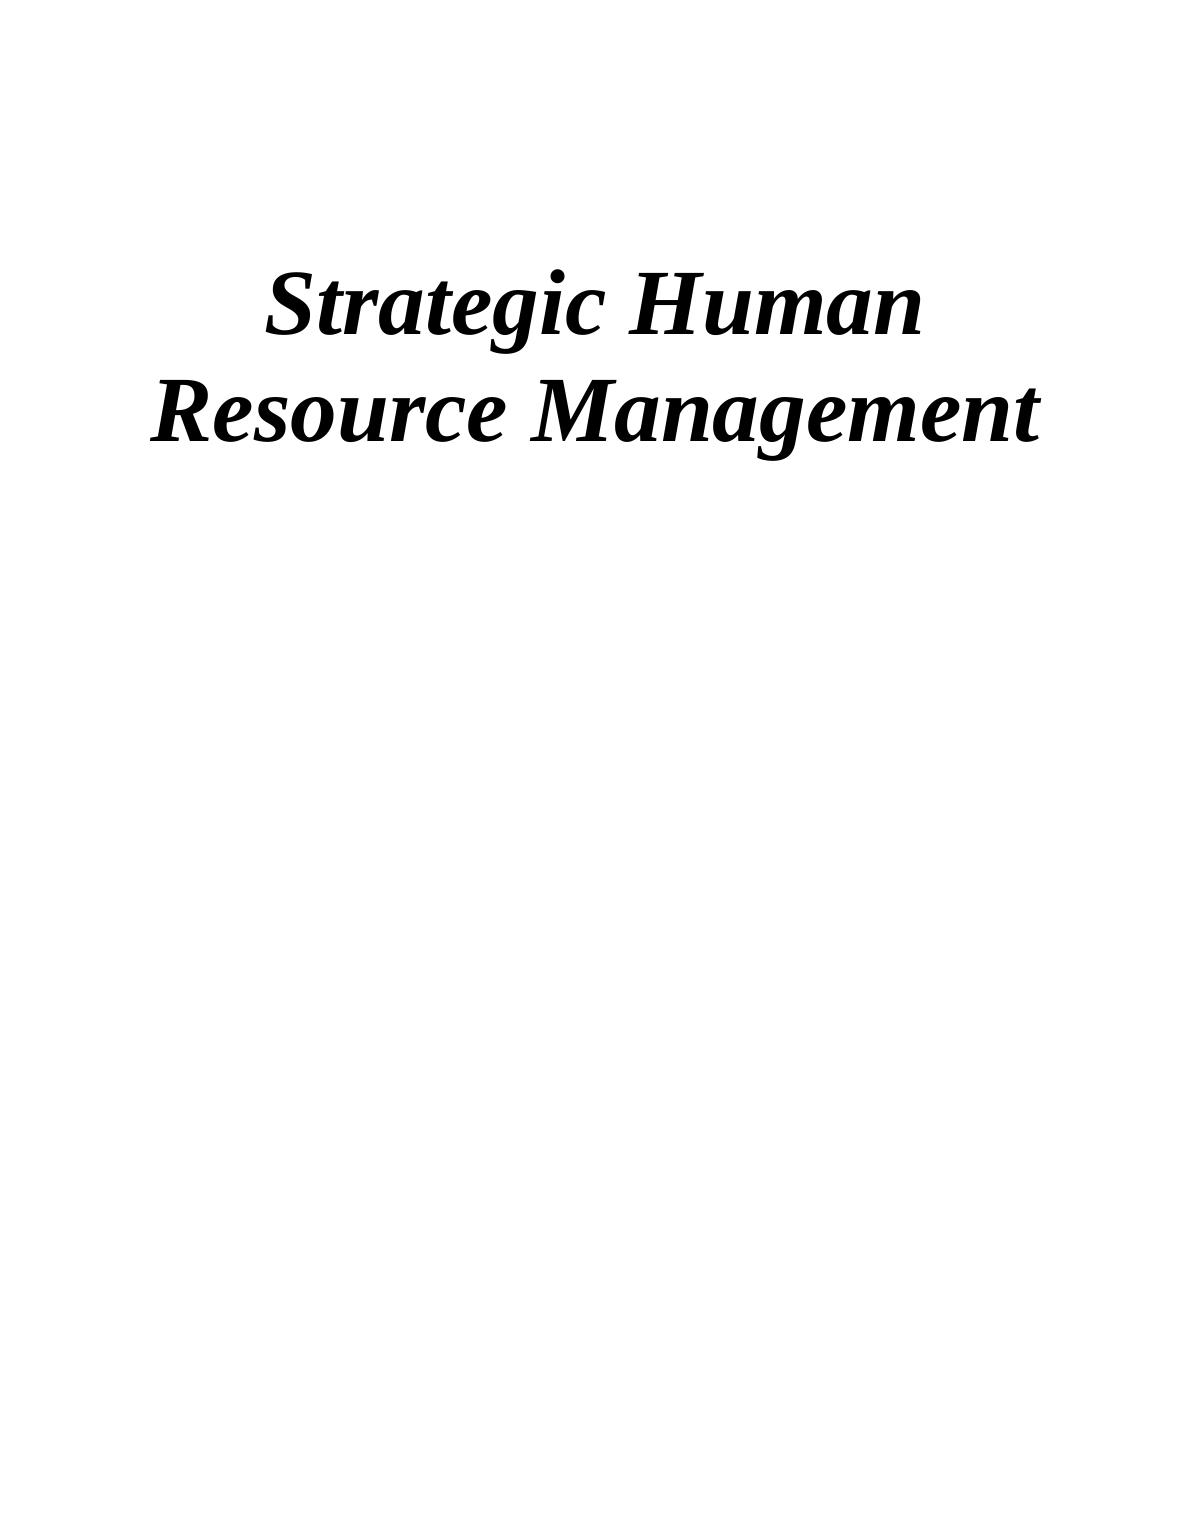 Strategic Human Resource Management Assignment Solved_1